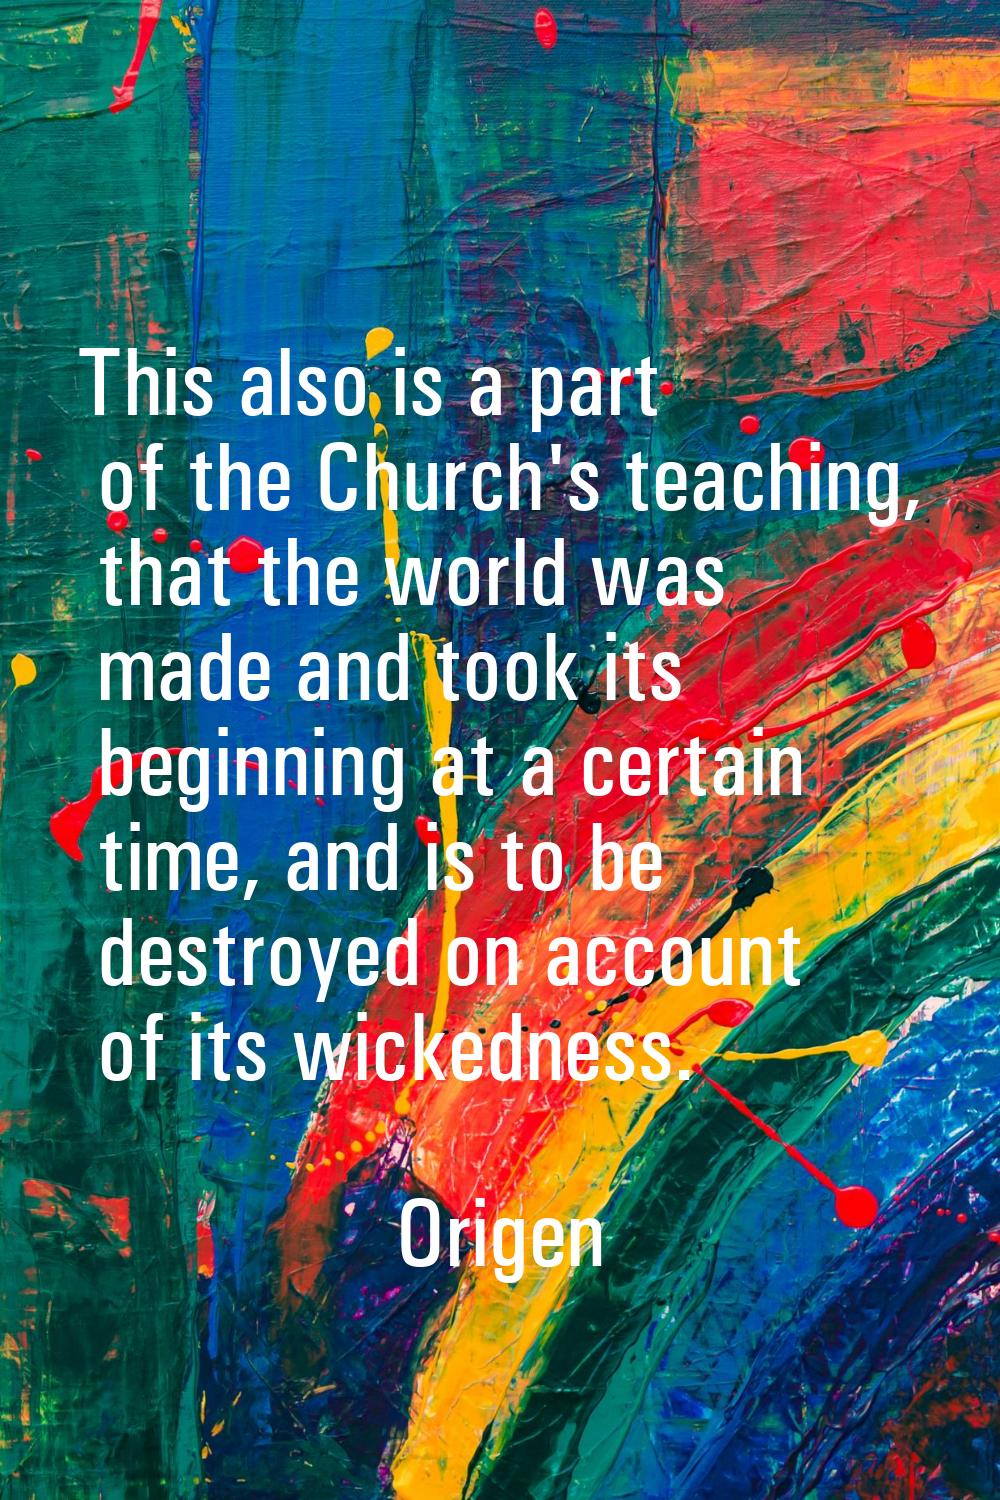 This also is a part of the Church's teaching, that the world was made and took its beginning at a c